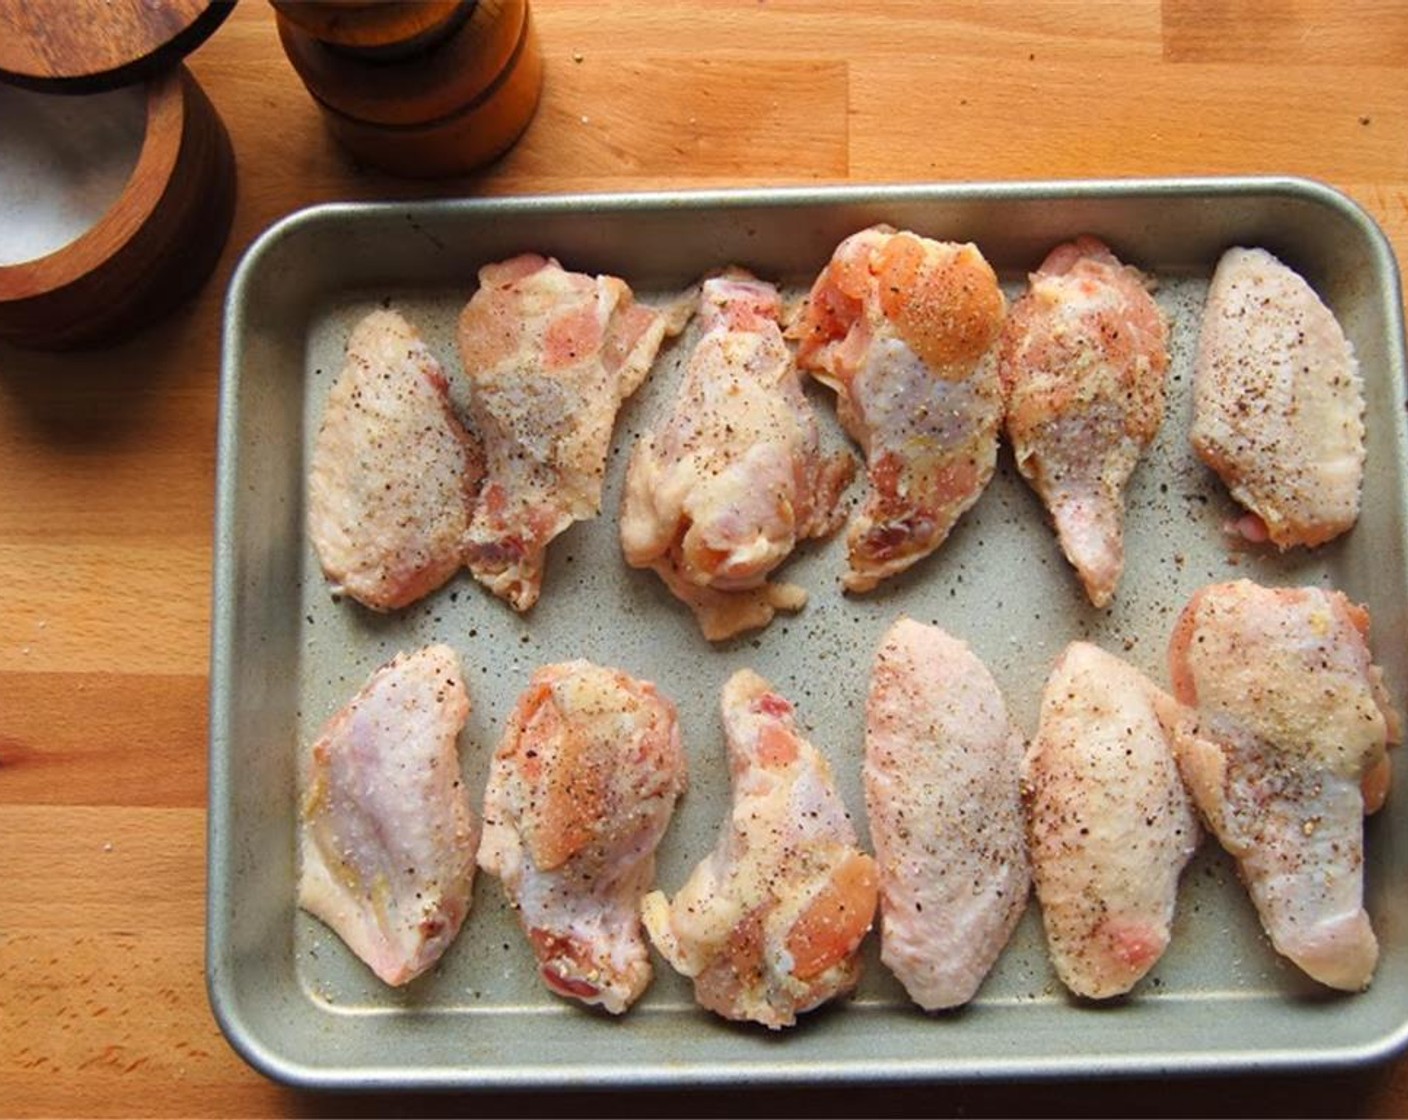 step 3 Toss the Chicken Wings (16) in a bowl with salt and pepper. Place on a baking tray. Put the wings on the pan in a single layer. Roast for about 25 minutes at 450 degrees F (230 degrees C).